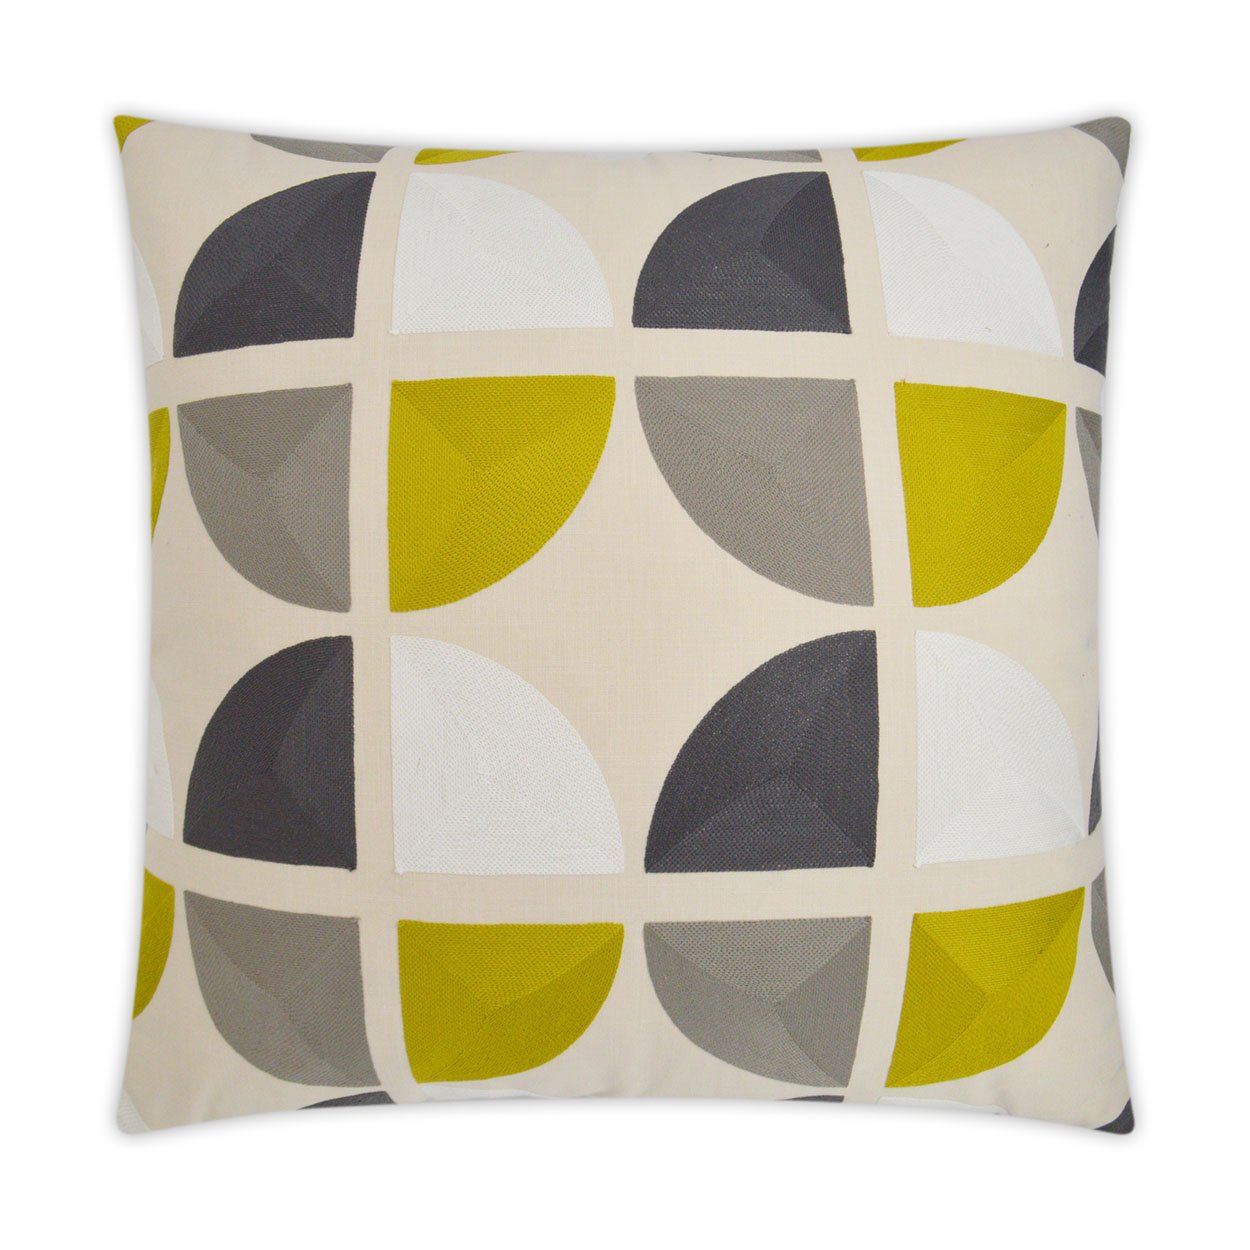 Luxury Pillow - 24" x 24" - Sunclipse; Embroidered yellow, black & gray over a cream background in a modern pattern